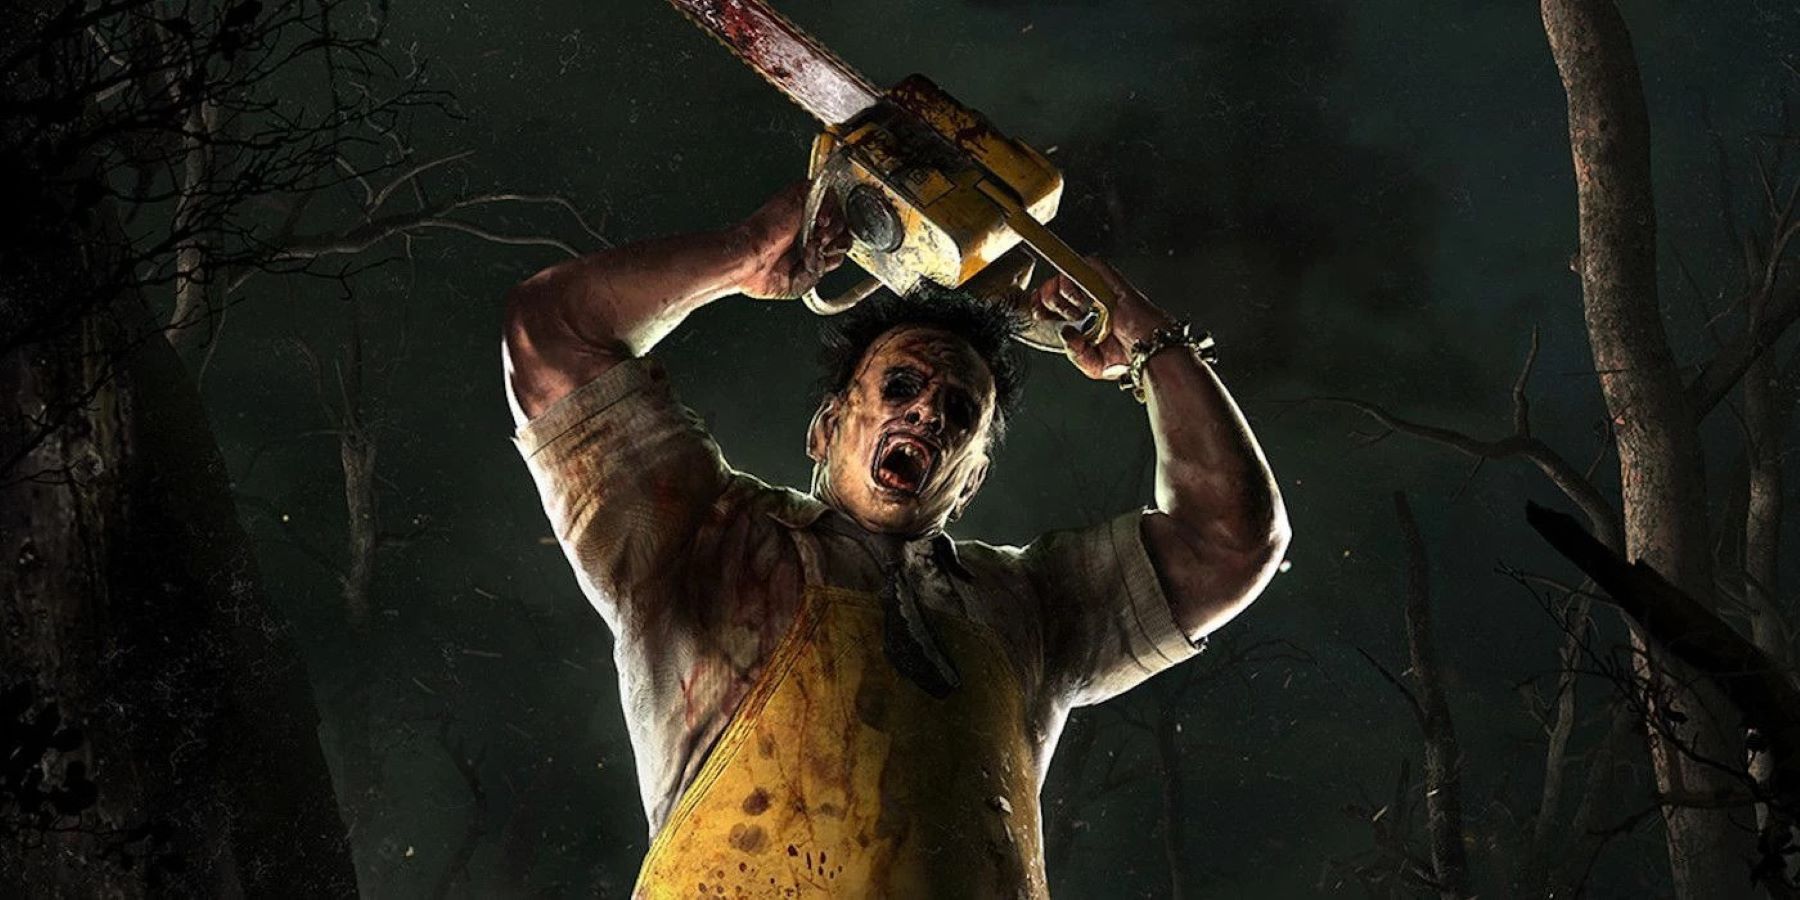 Leatherface in the Texas Chain Saw Massacre video game